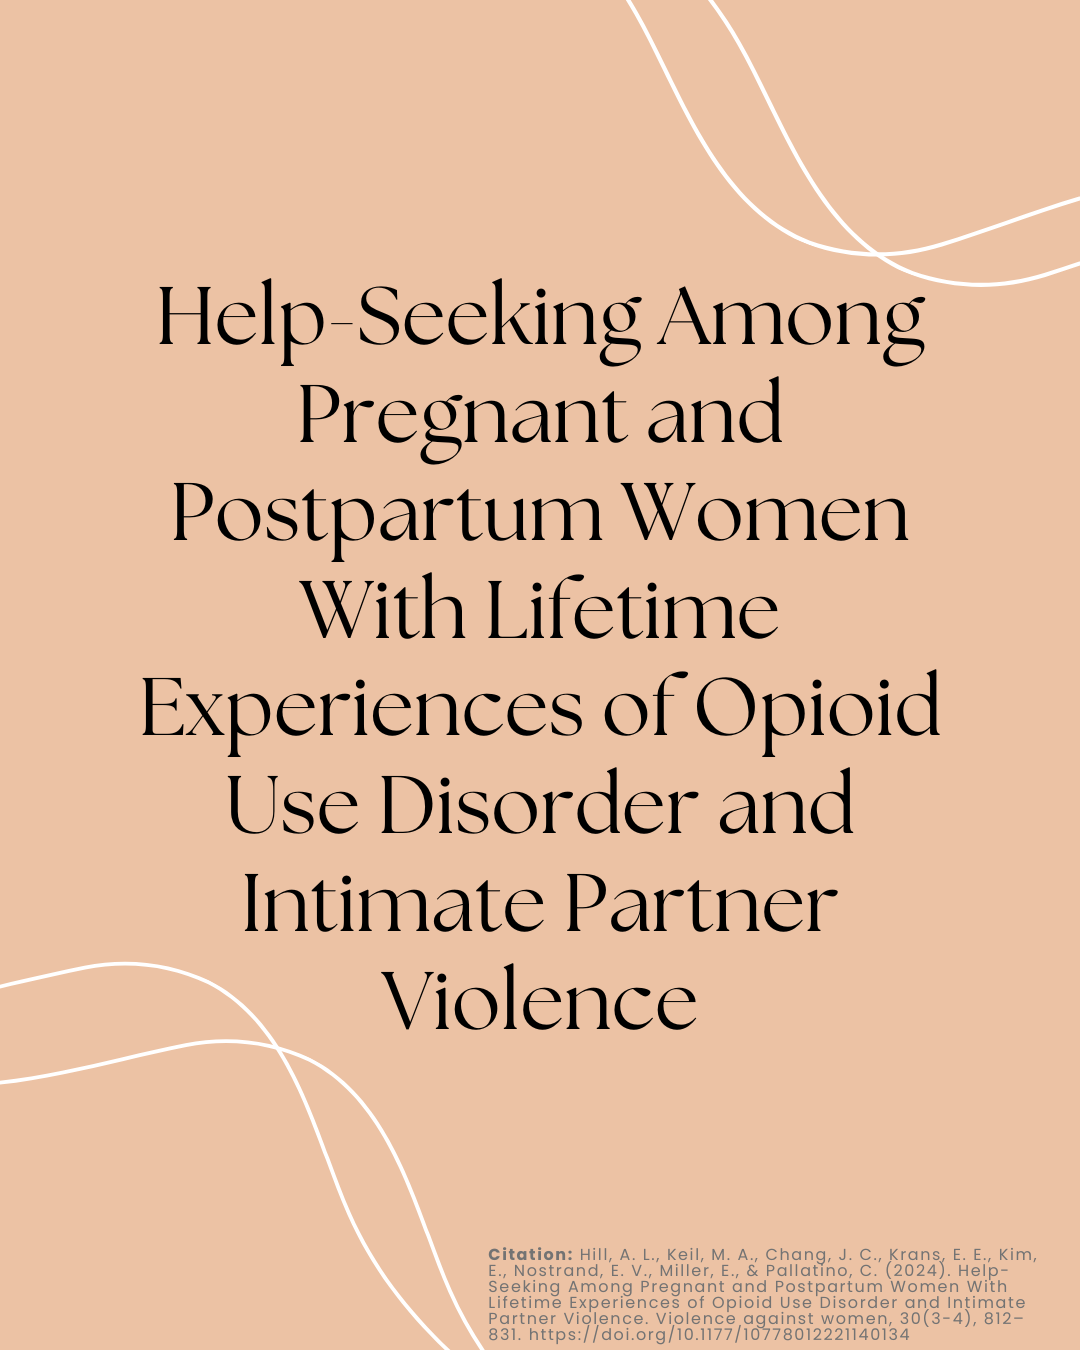 Help-Seeking Among Pregnant and Postpartum Women With Lifetime Experiences of Opioid Use Disorder and Intimate Partner Violence